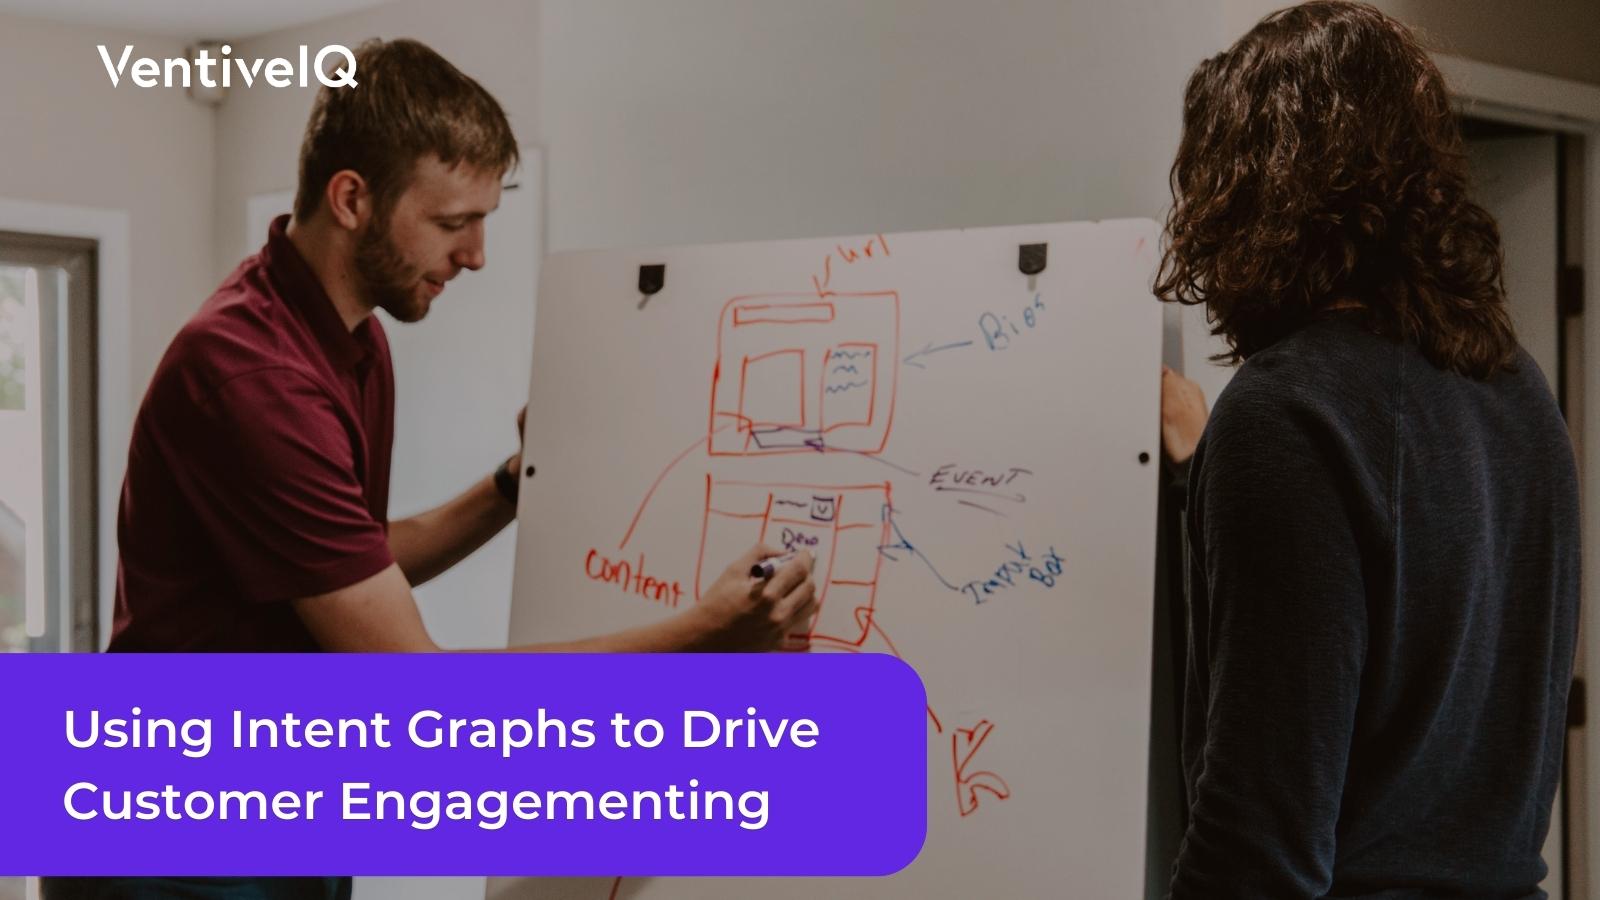 What Is an Intent Graph & How Can It Help You Understand Your Customers Better? 